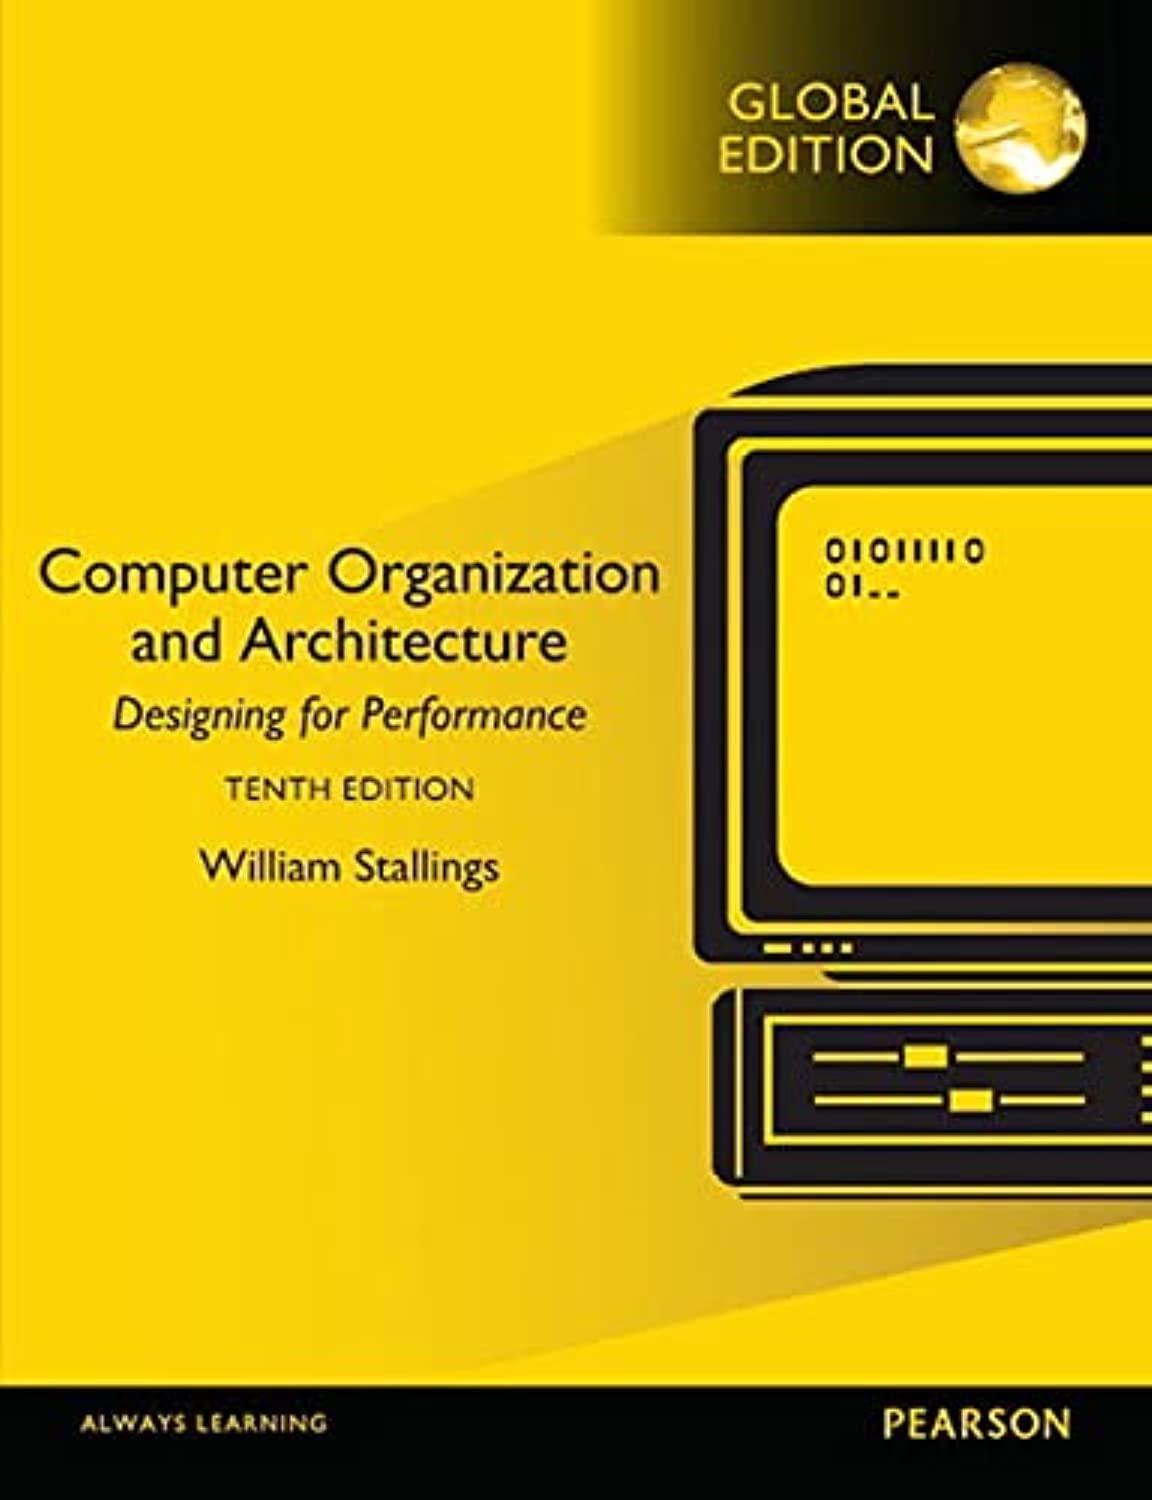 computer organization and architecture 10th global edition william stallings 1292096853, 978-1292096858